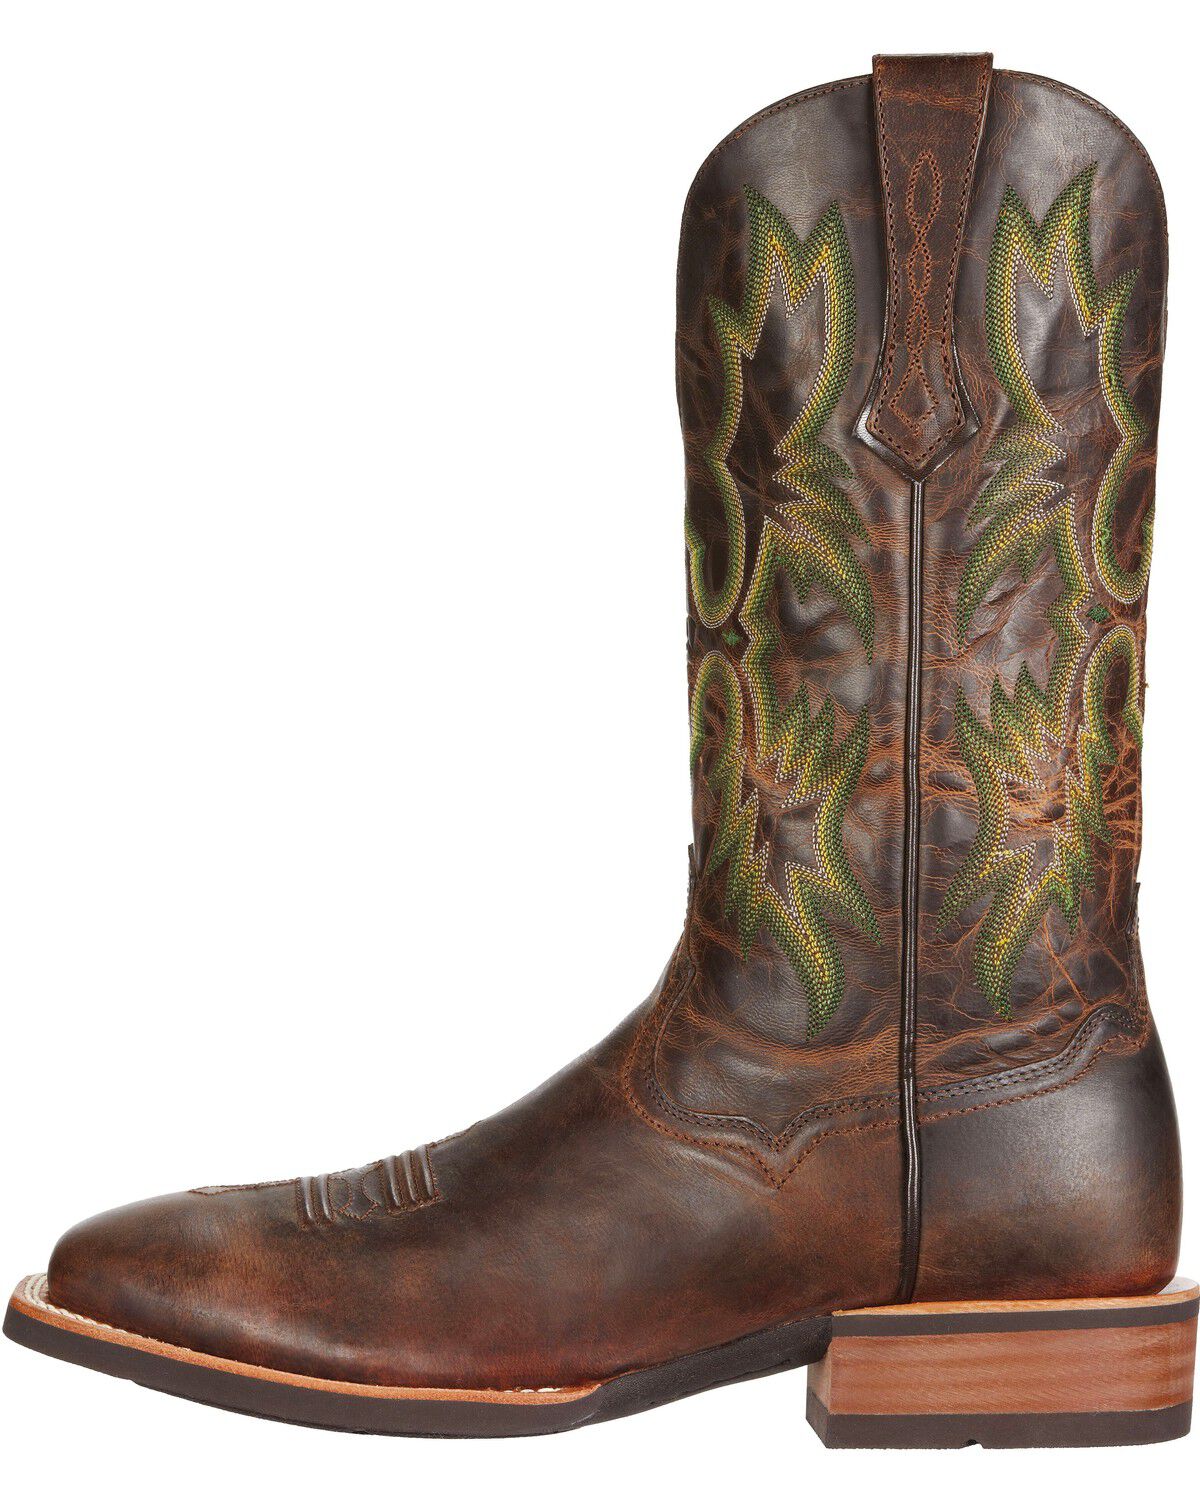 Ariat Tombstone Cowboy Boots - Square 